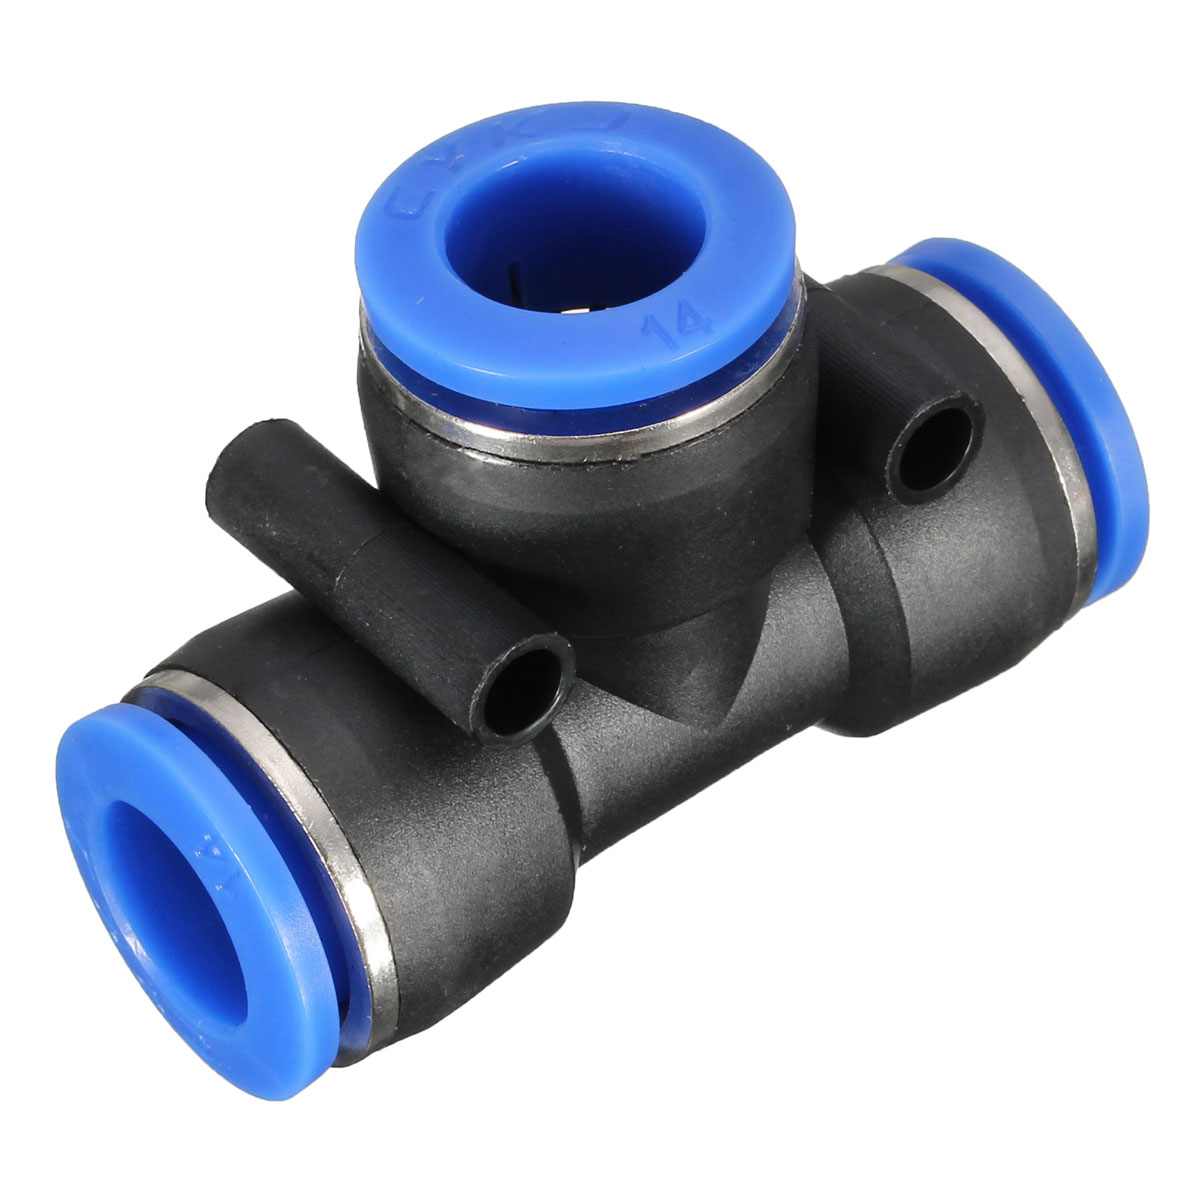 Pneumatic-Push-In-Fittings-For-Air-Water-Hose-Pipe-Connectors-Tube-Connector-1030560-6